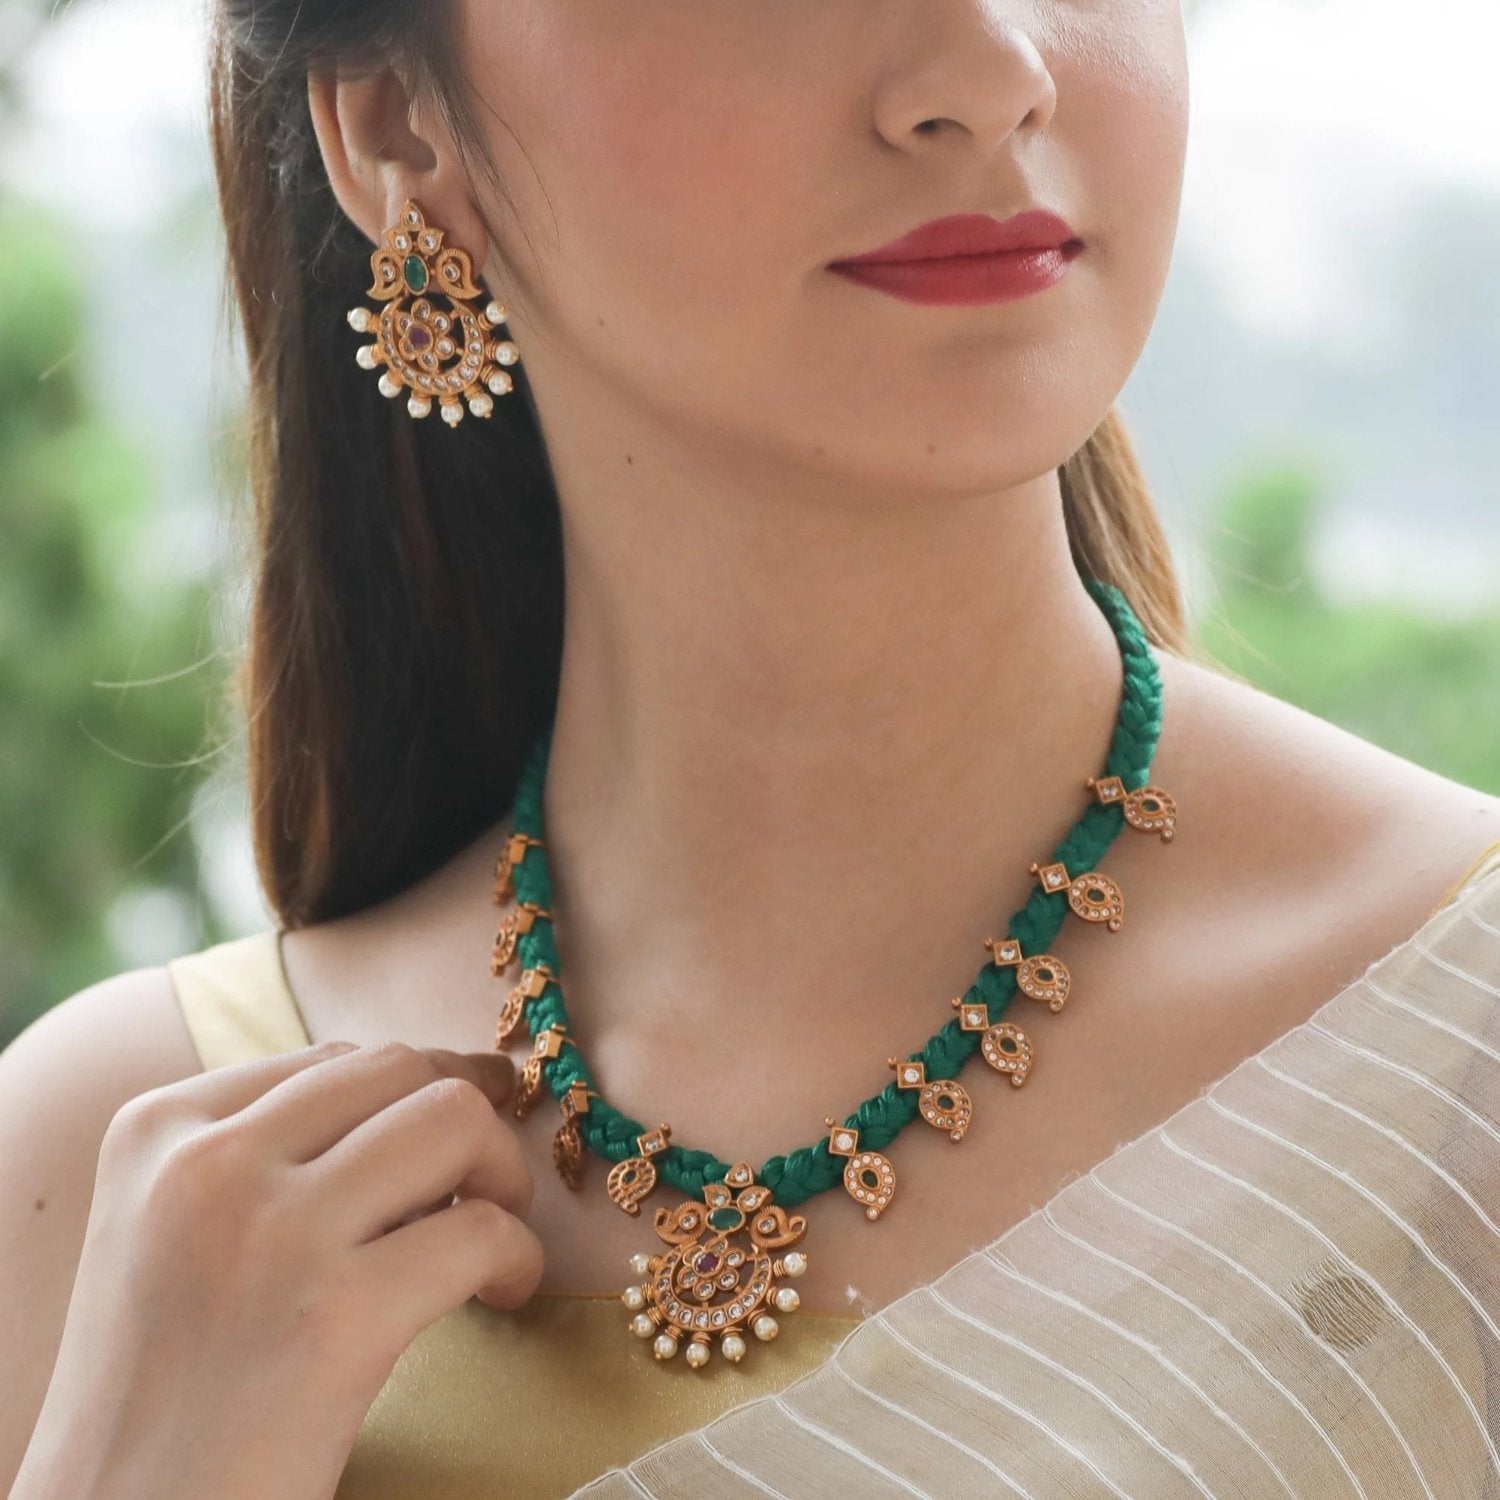 A picture of an Indian artificial jewellery set with a gold necklace, pendant, and matching earrings with intricate beadwork designs.